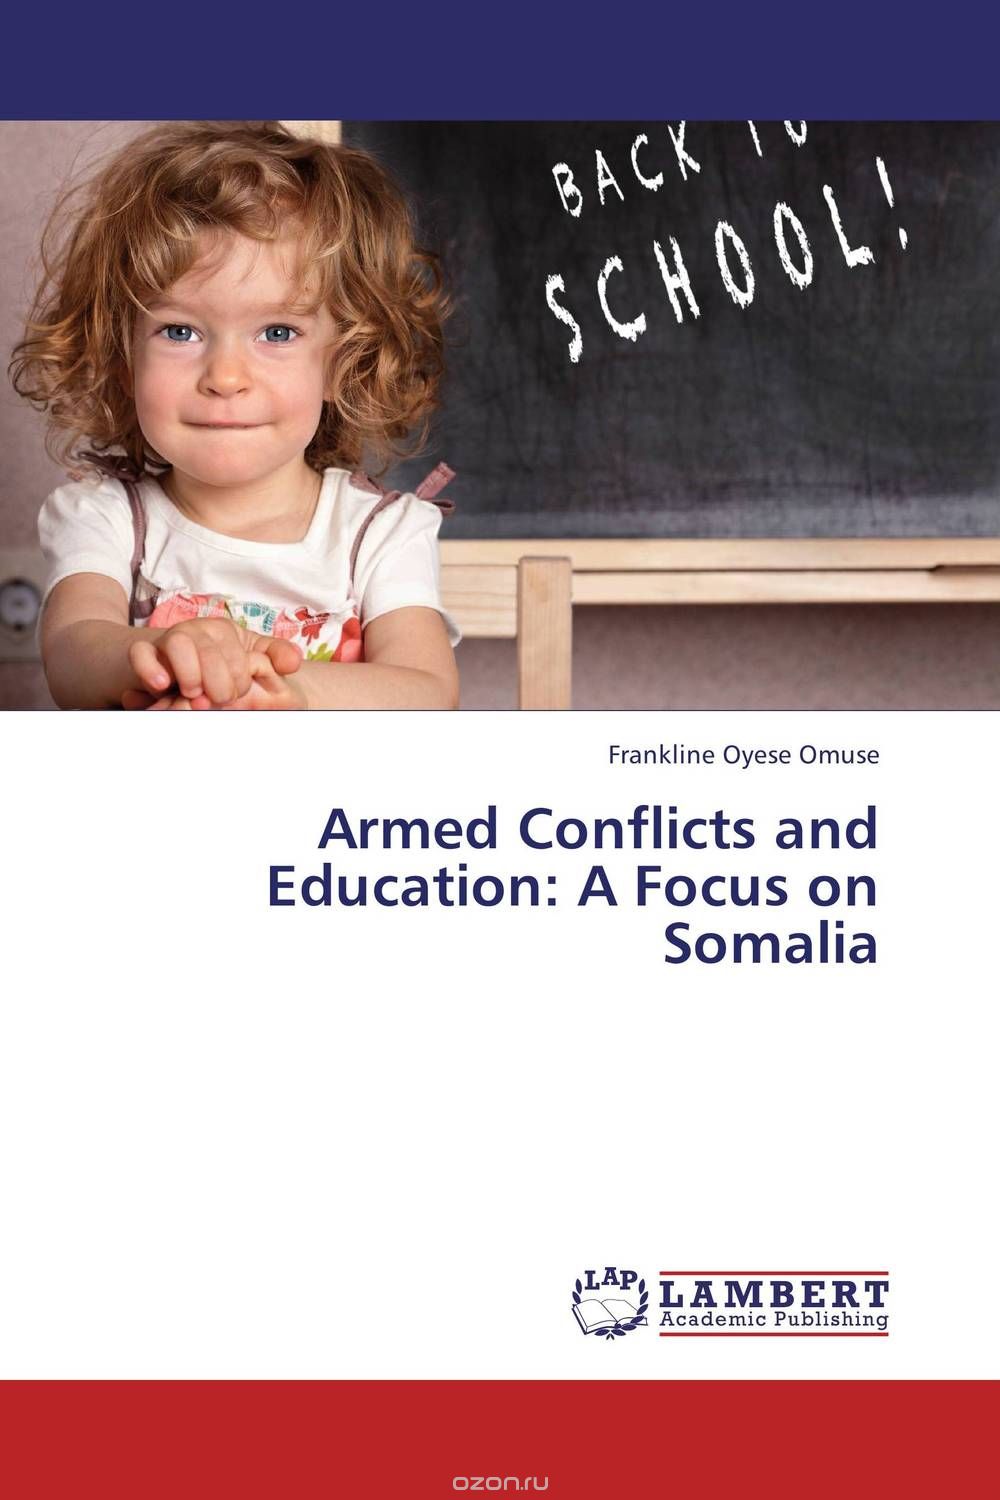 Скачать книгу "Armed Conflicts and Education: A Focus on Somalia"